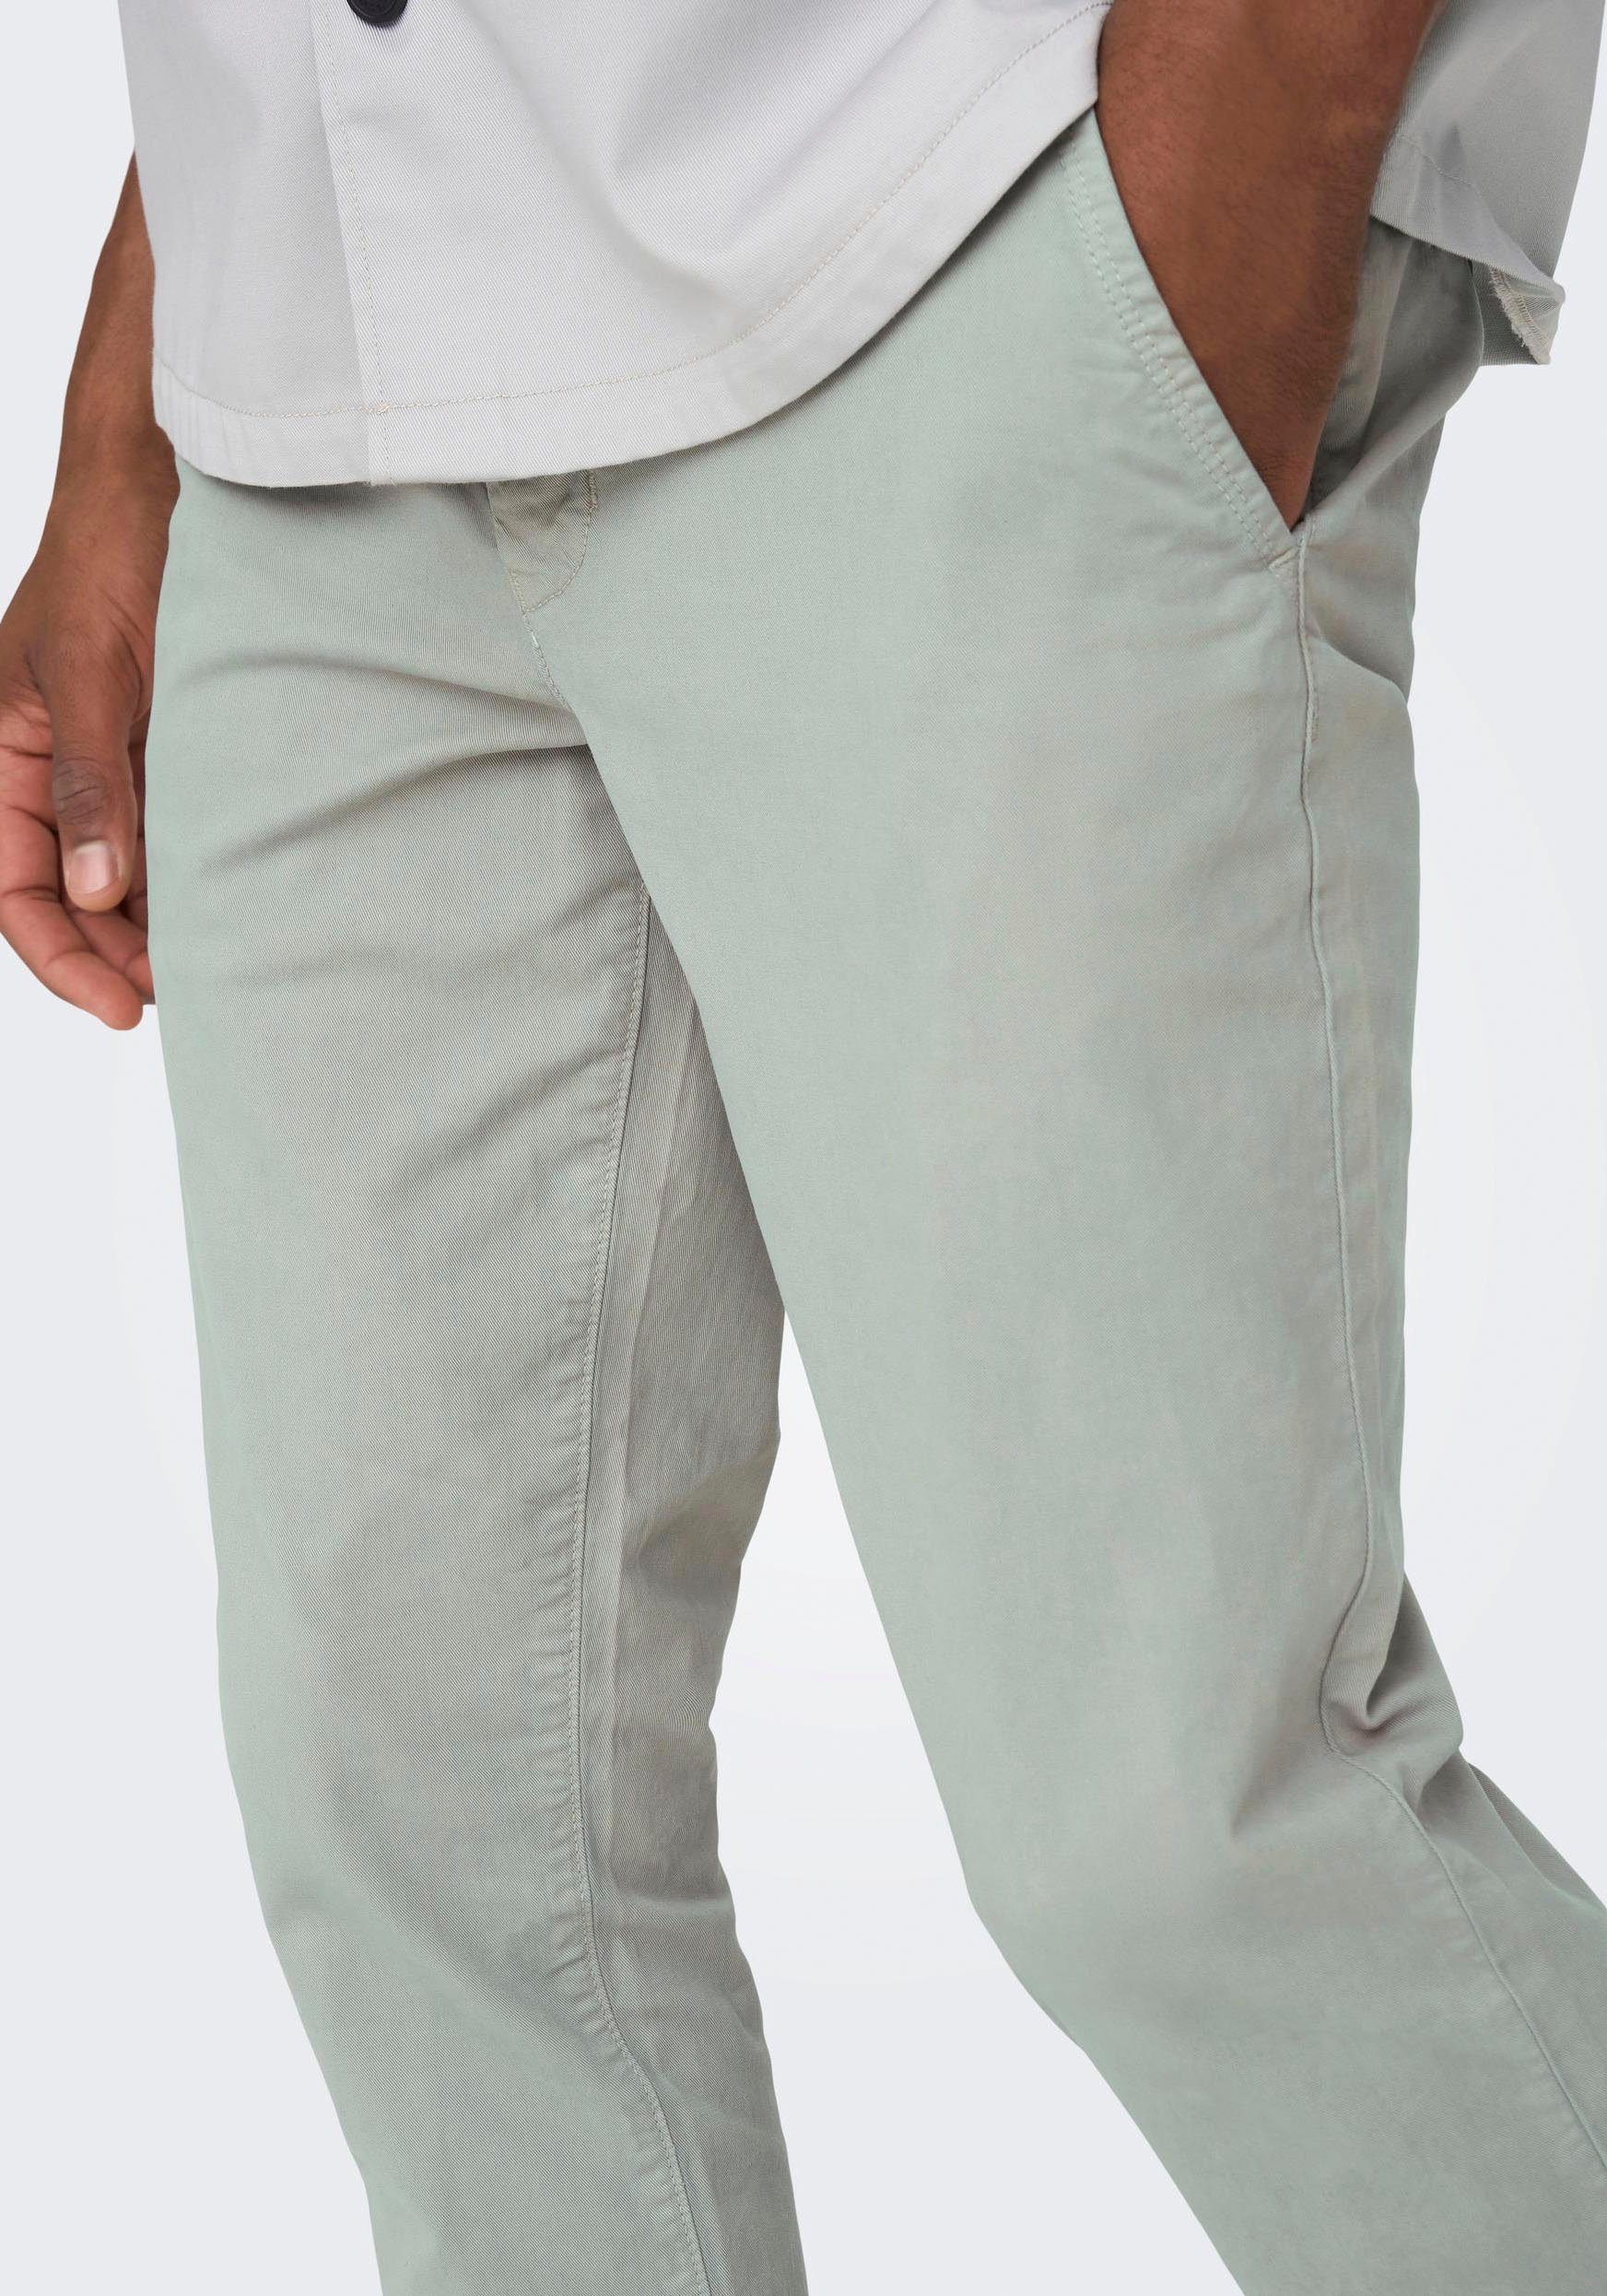 ONLY & SONS Chinohose im limestone 4-Pocket-Style